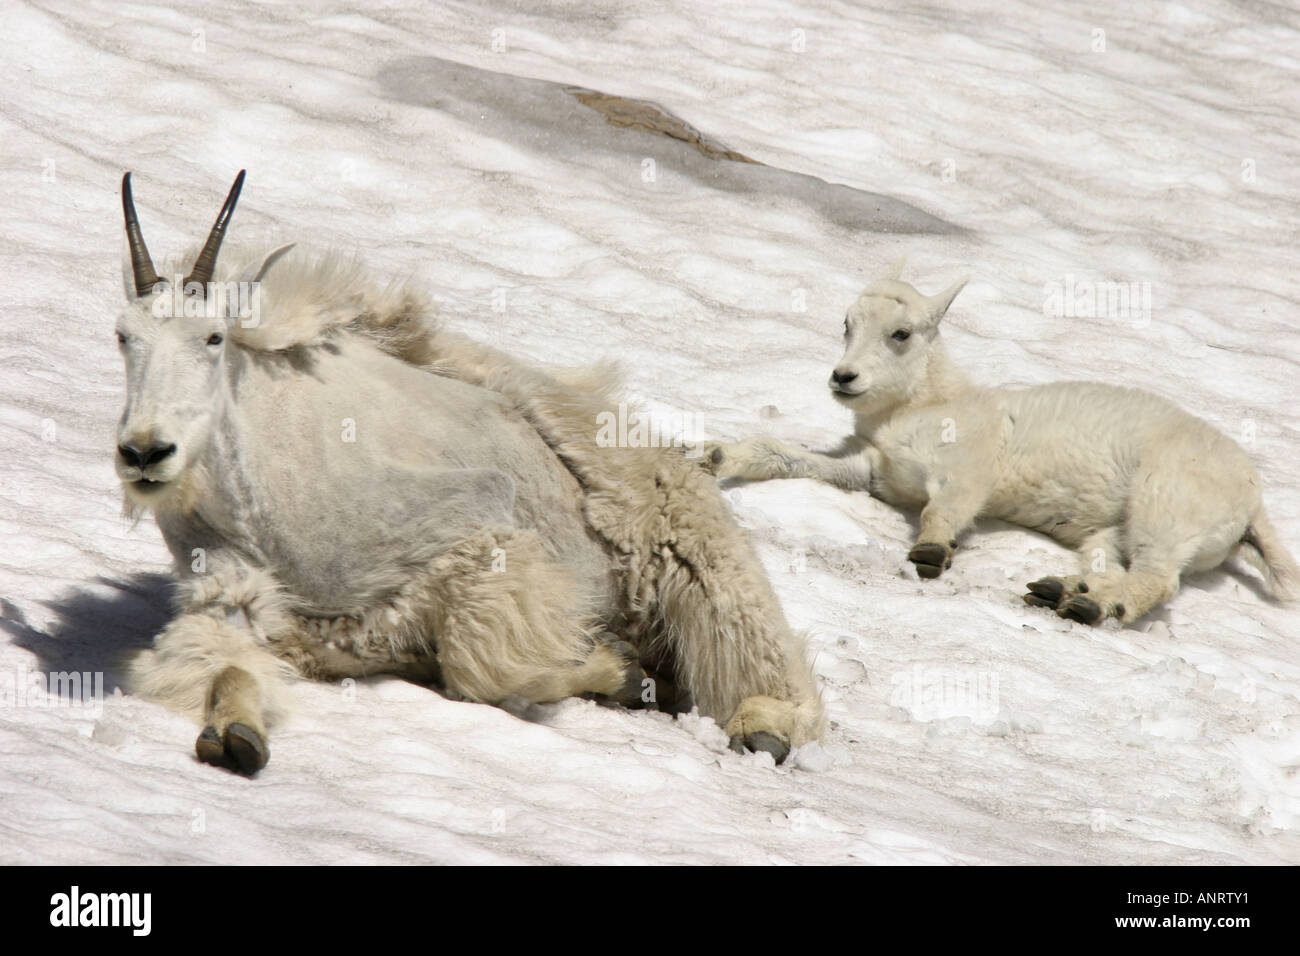 A nanny goat and her kid try to keep cool in the snow on hot summer day. Stock Photo